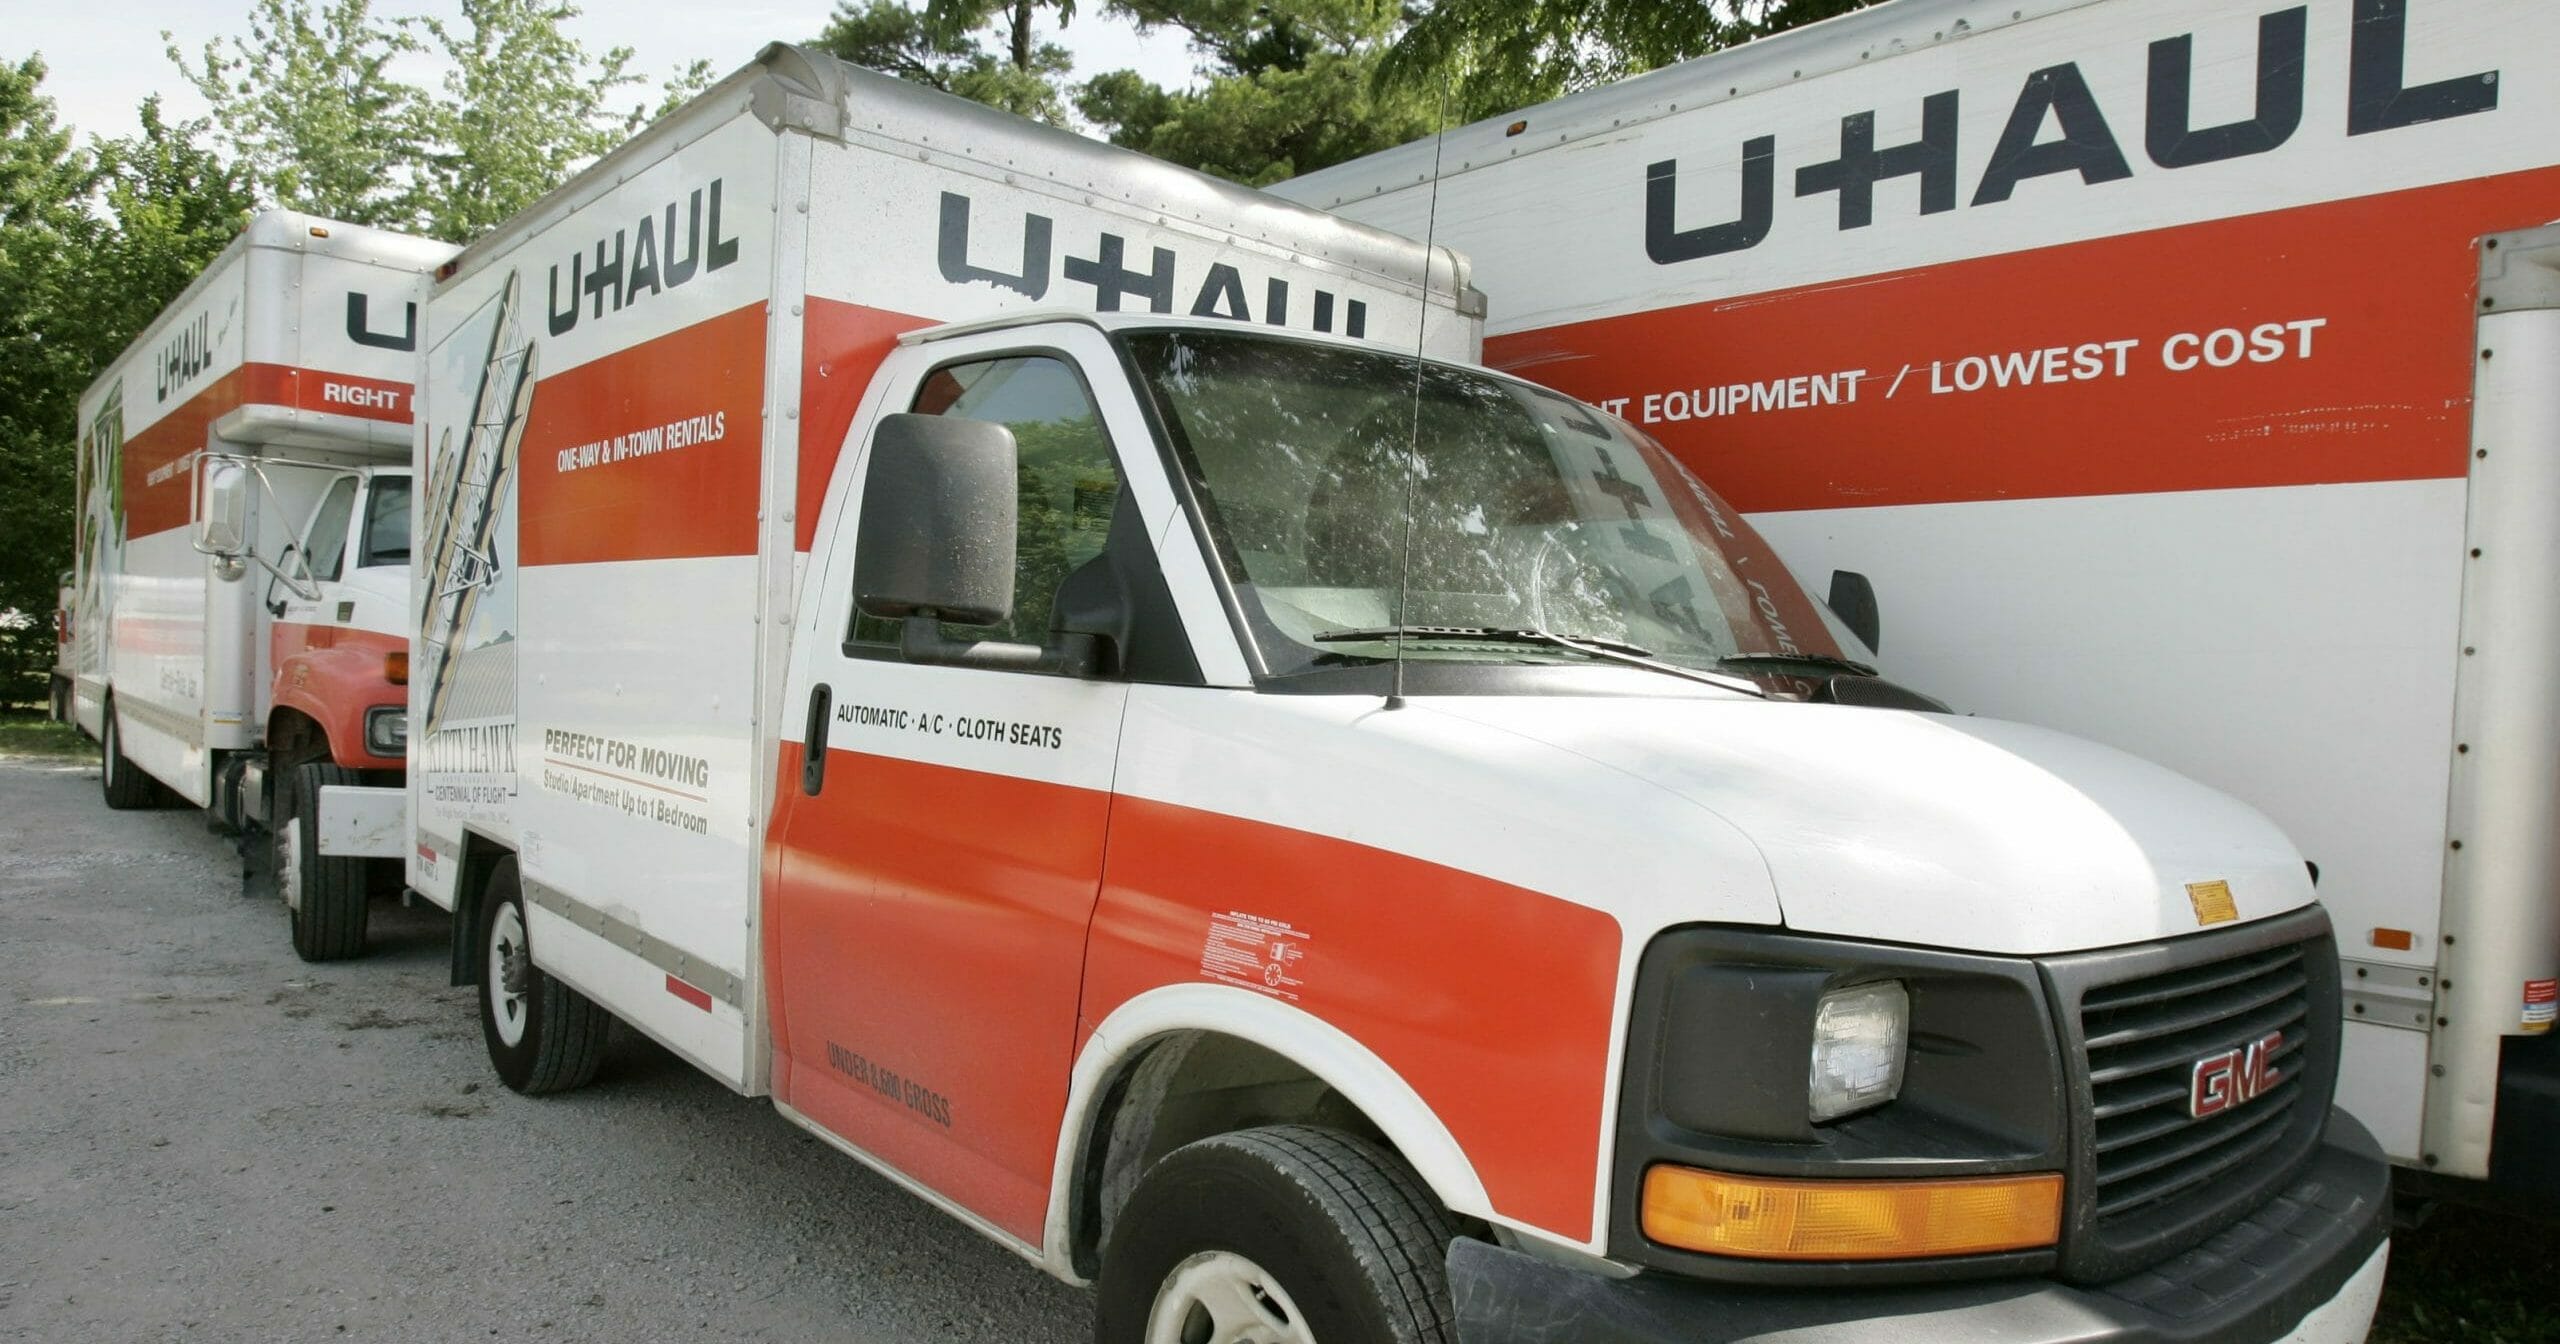 In this June 14, 2006, file photo, U-Haul trucks sit on a dealer lot in Des Moines, Iowa. U-Haul has a New Year's resolution: cut down on hiring people who smoke. The moving company said that it won't hire nicotine users in the 21 states where it is legal to do so, saying that it wants to ensure a "healthier workforce." The new policy will start Feb. 1, 2020, and won't apply to those hired before then.